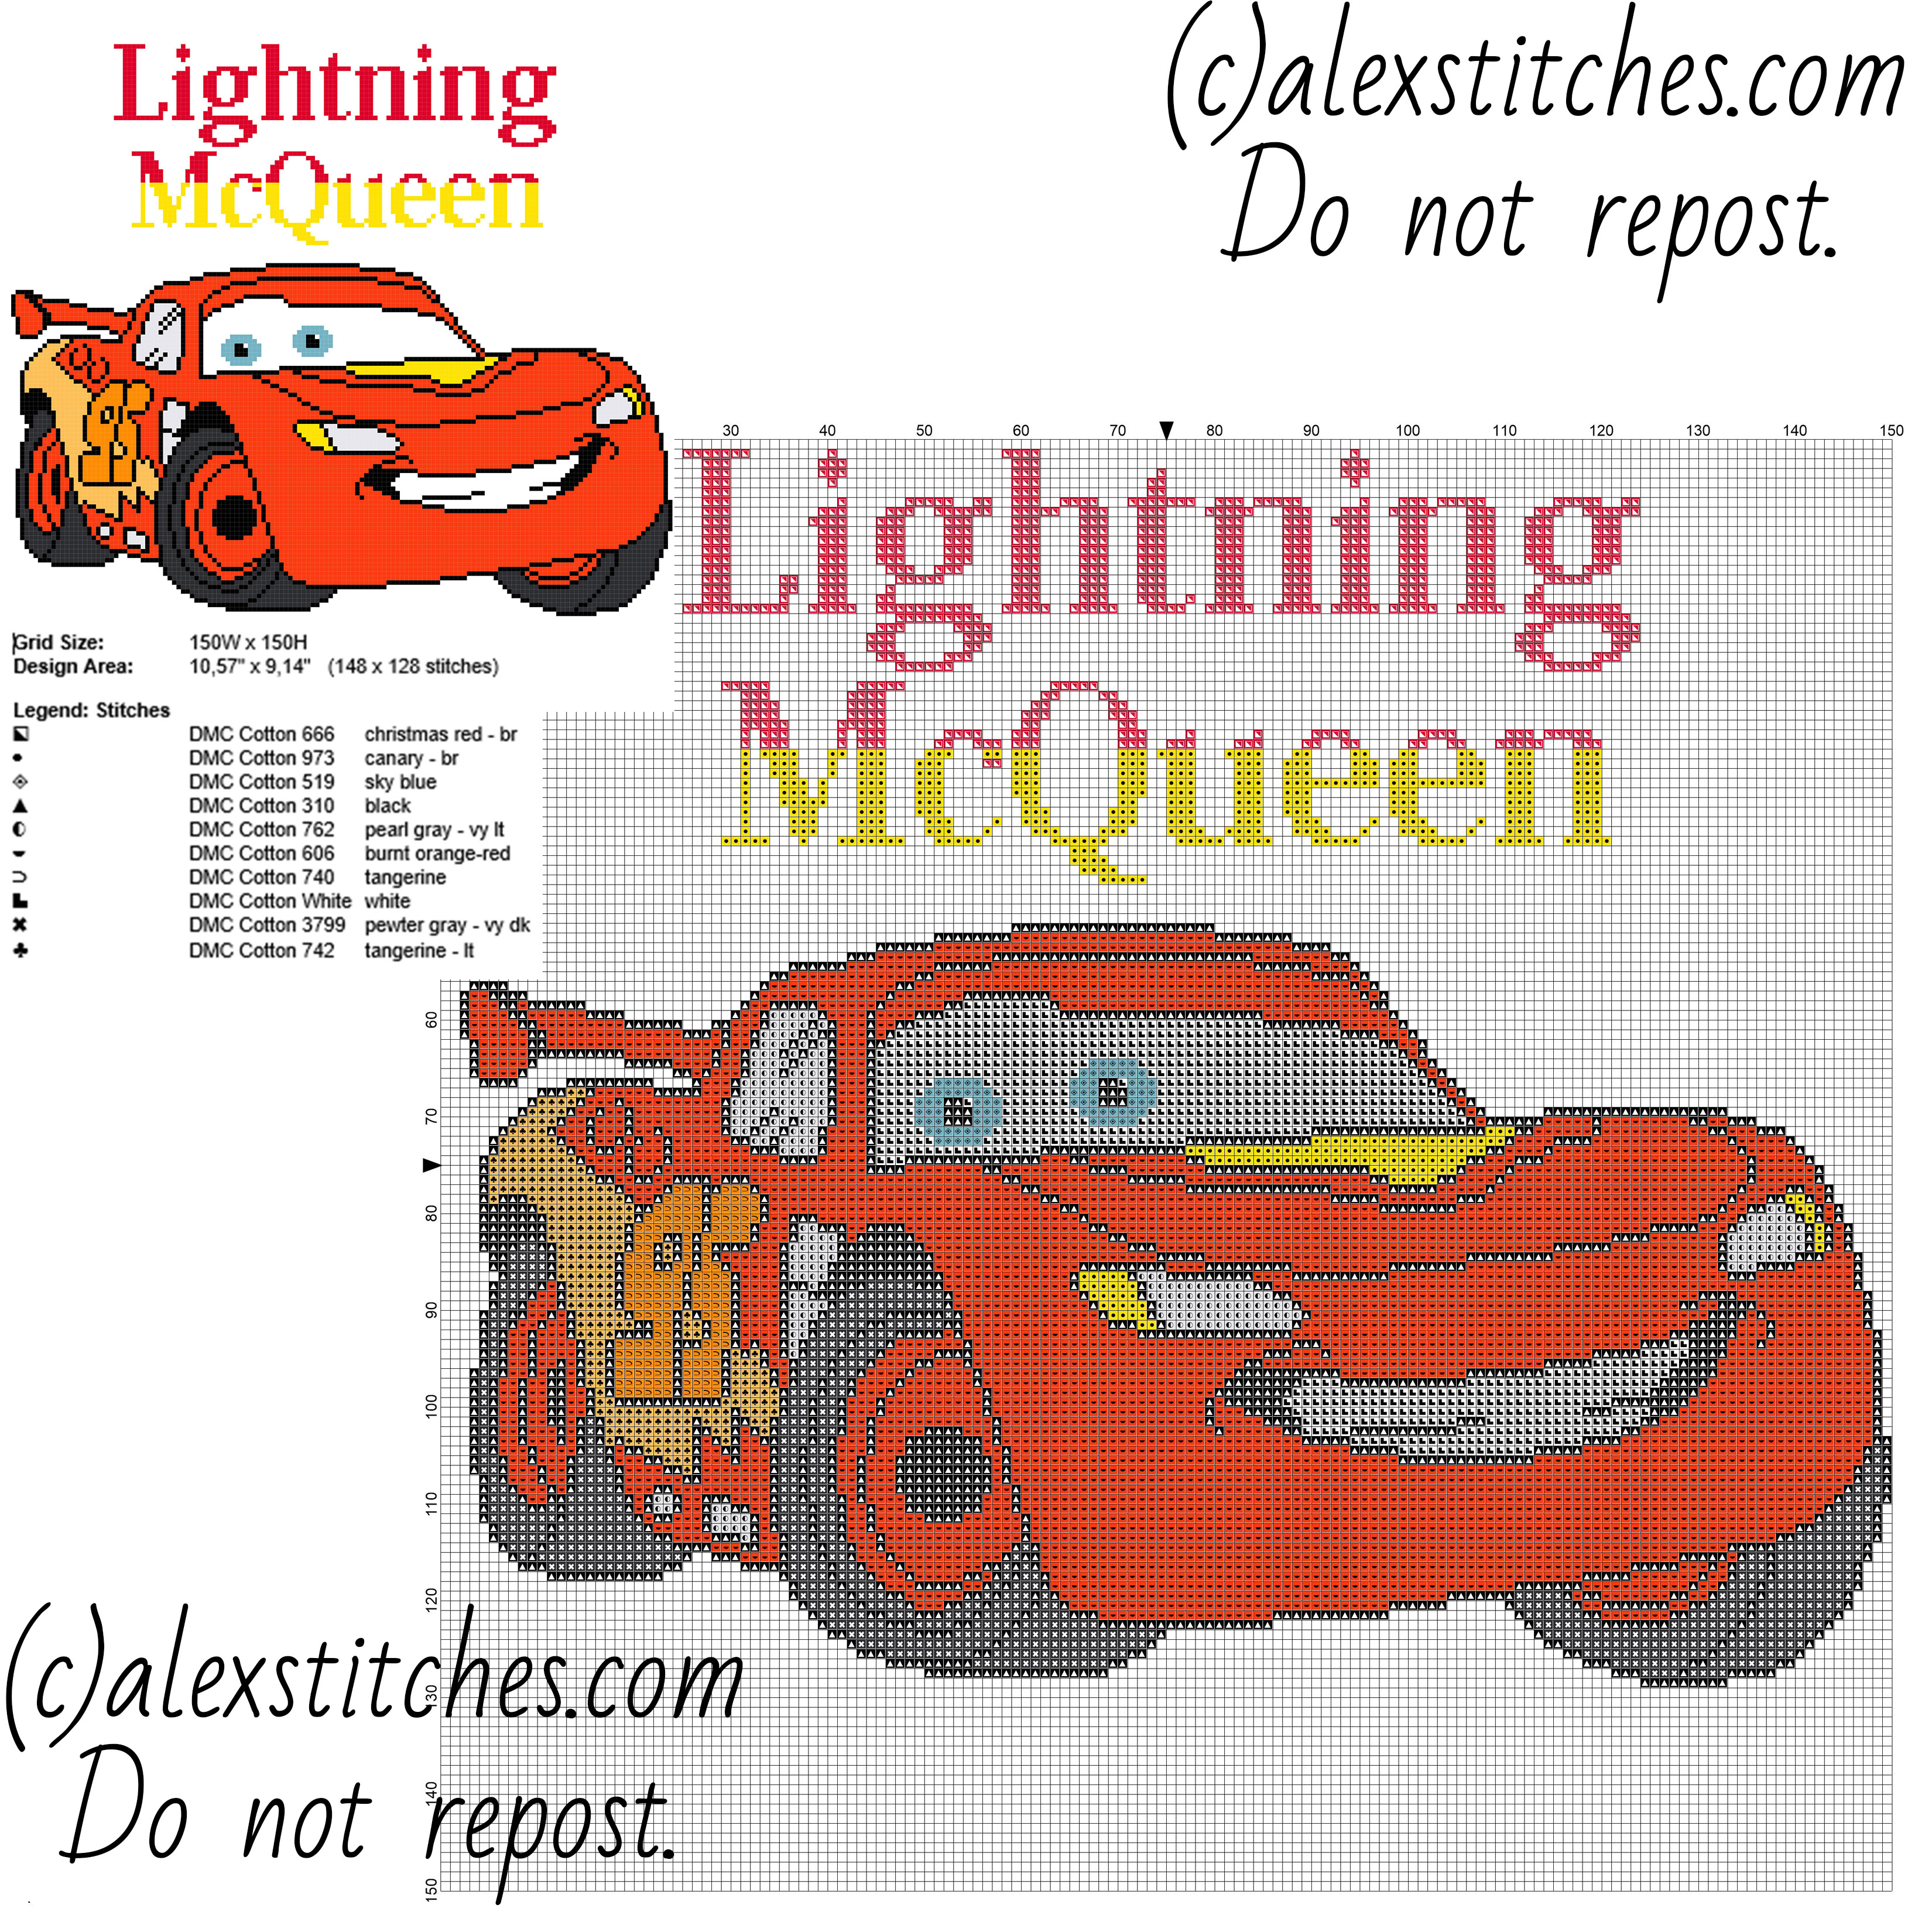 Lightning McQueen from Disney cartoon Cars and Cars 2 free cross stitch pattern big size about 150 x 150